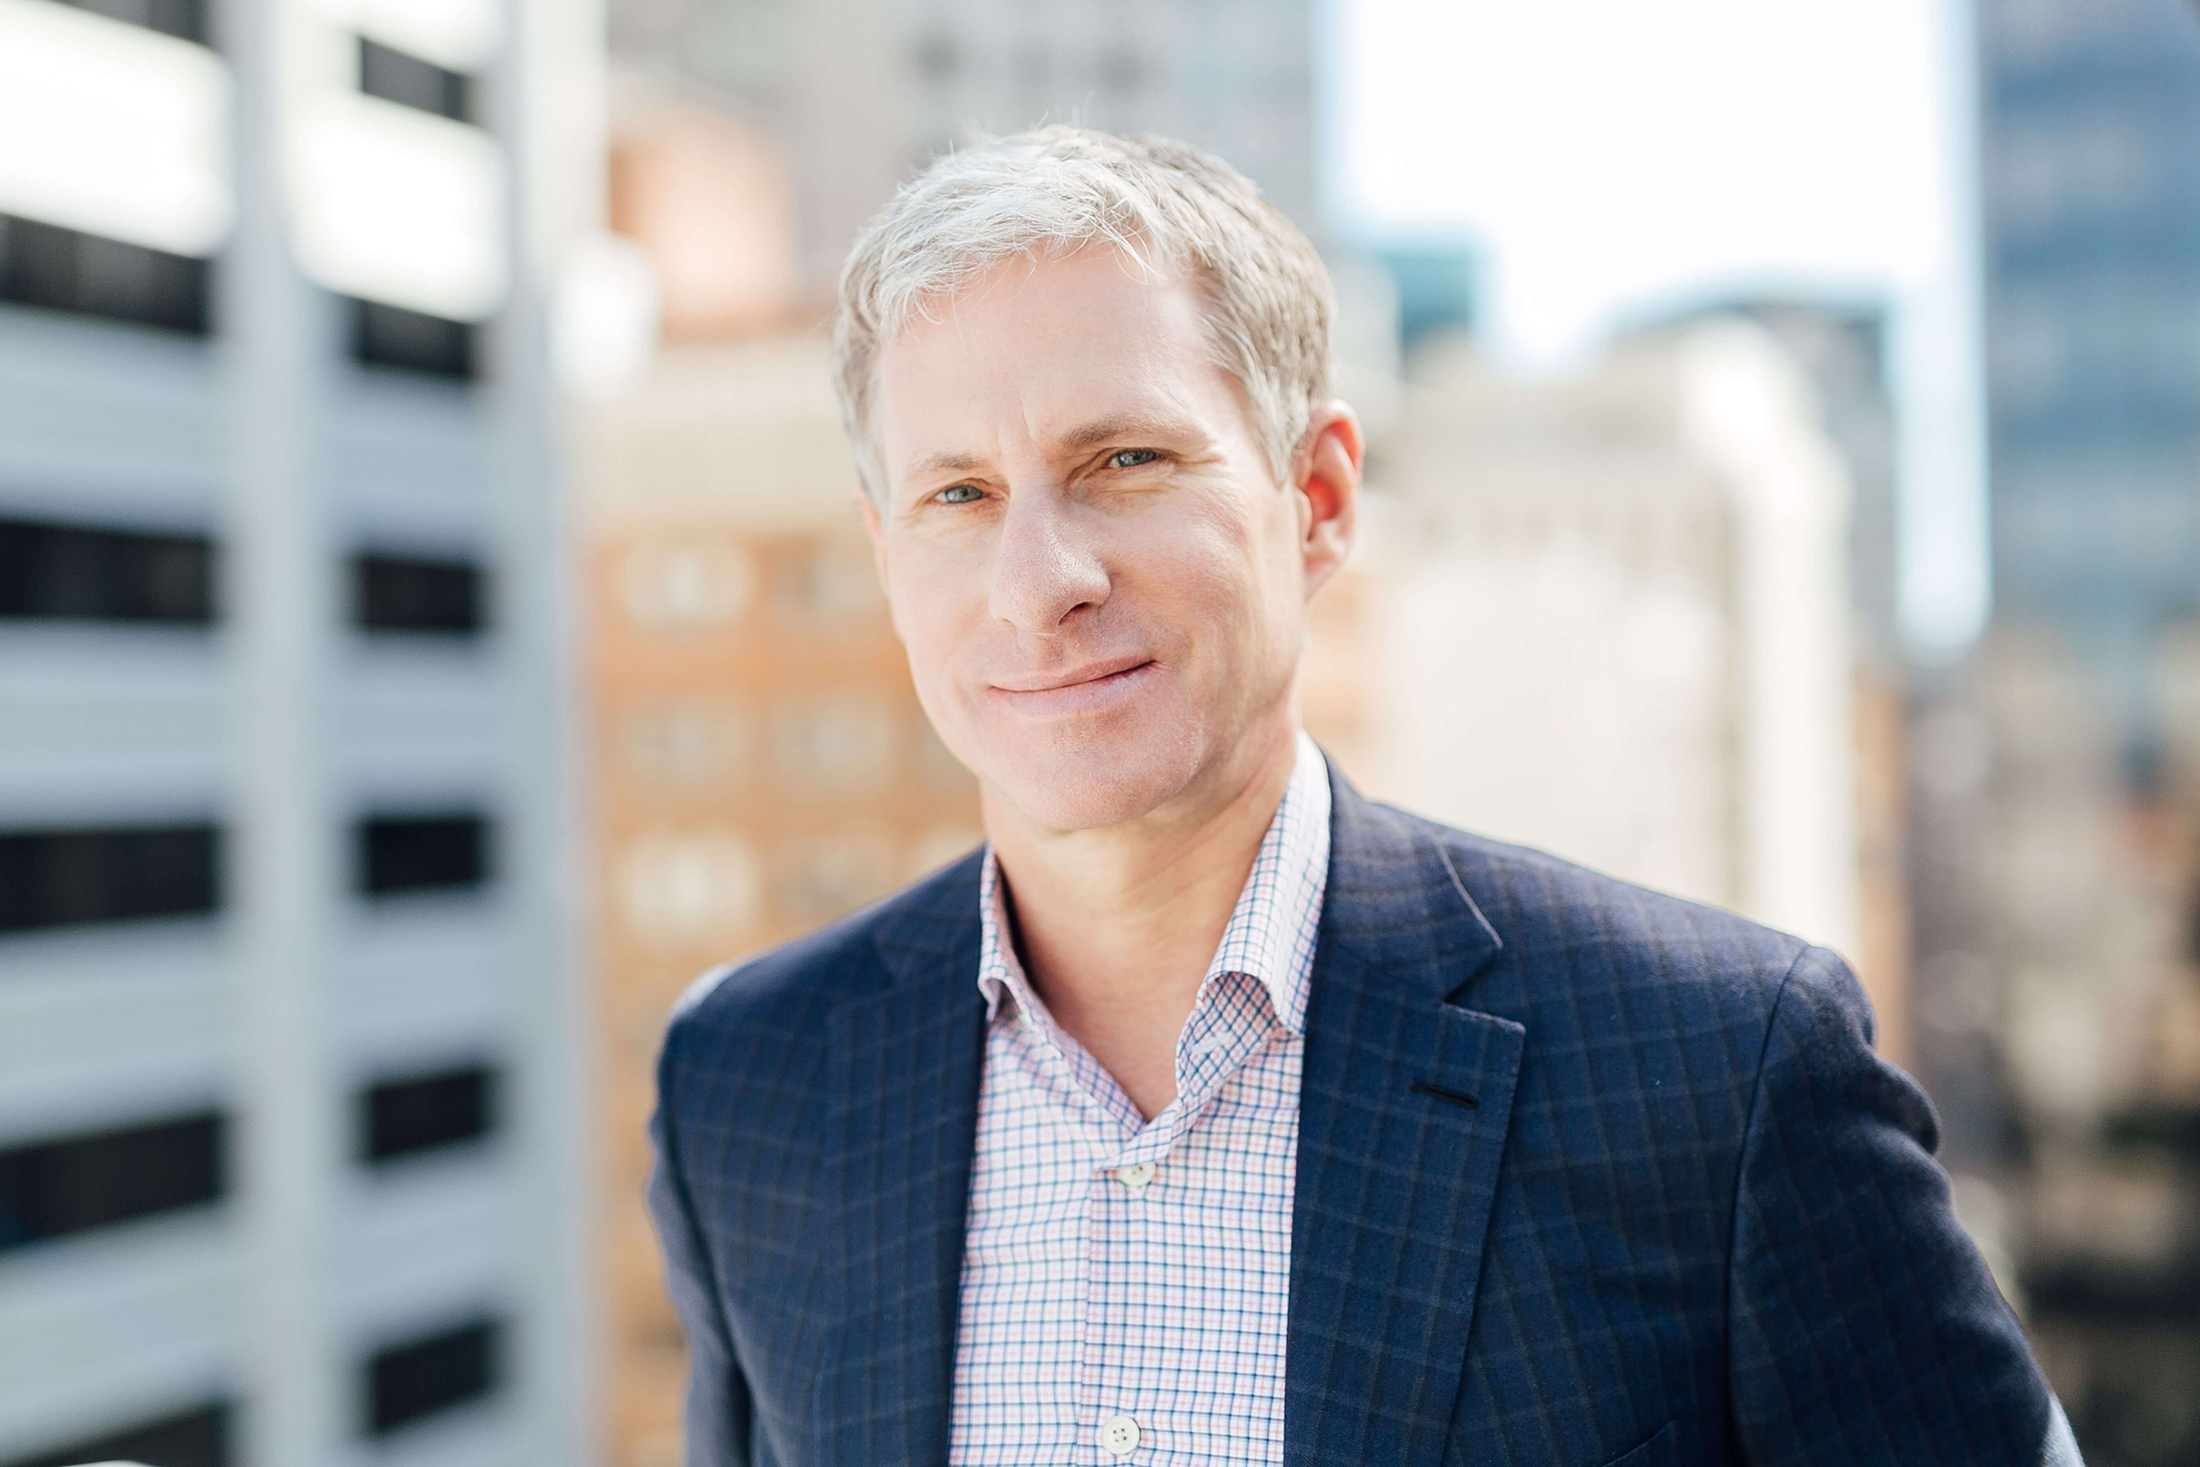 Chris Larsen, chairman of Ripple Labs, poses in a blue blazer at a Downtown location.